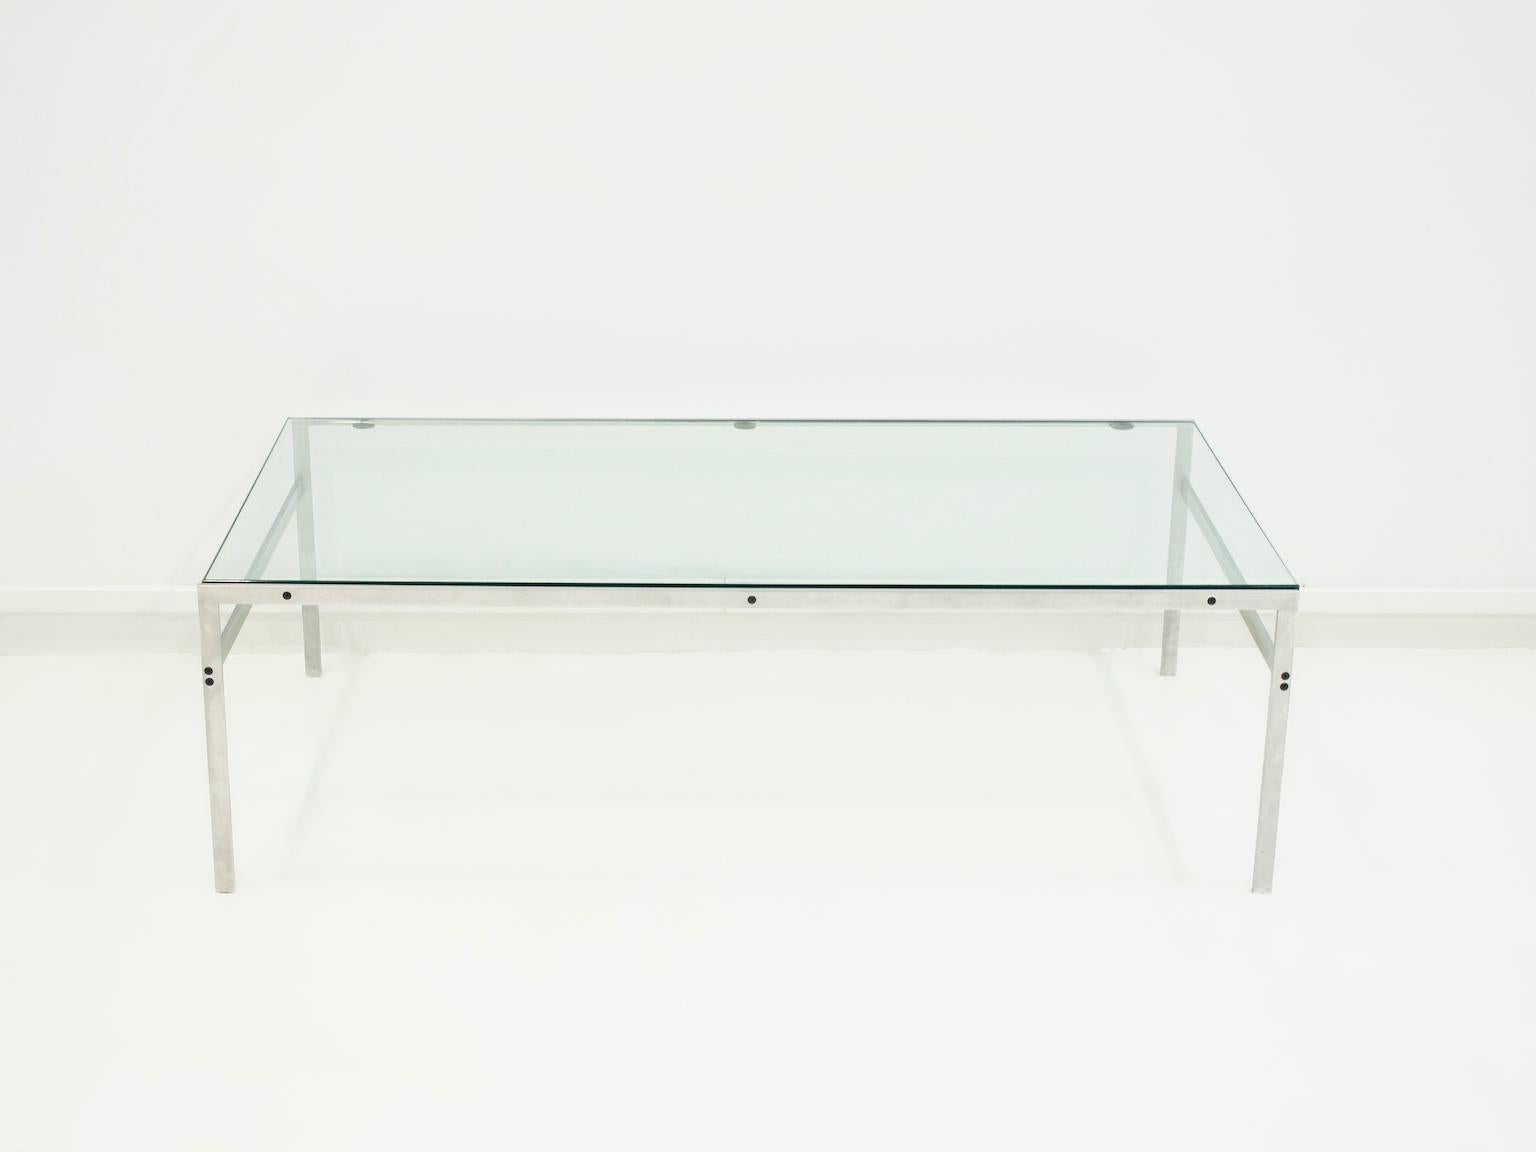 Minimalist coffee table, model BO-551, designed in 1963 by Preben Fabricius and Jørgen Kastholm. Steel frame with a glass top. Produced by Bo-Ex Furniture.